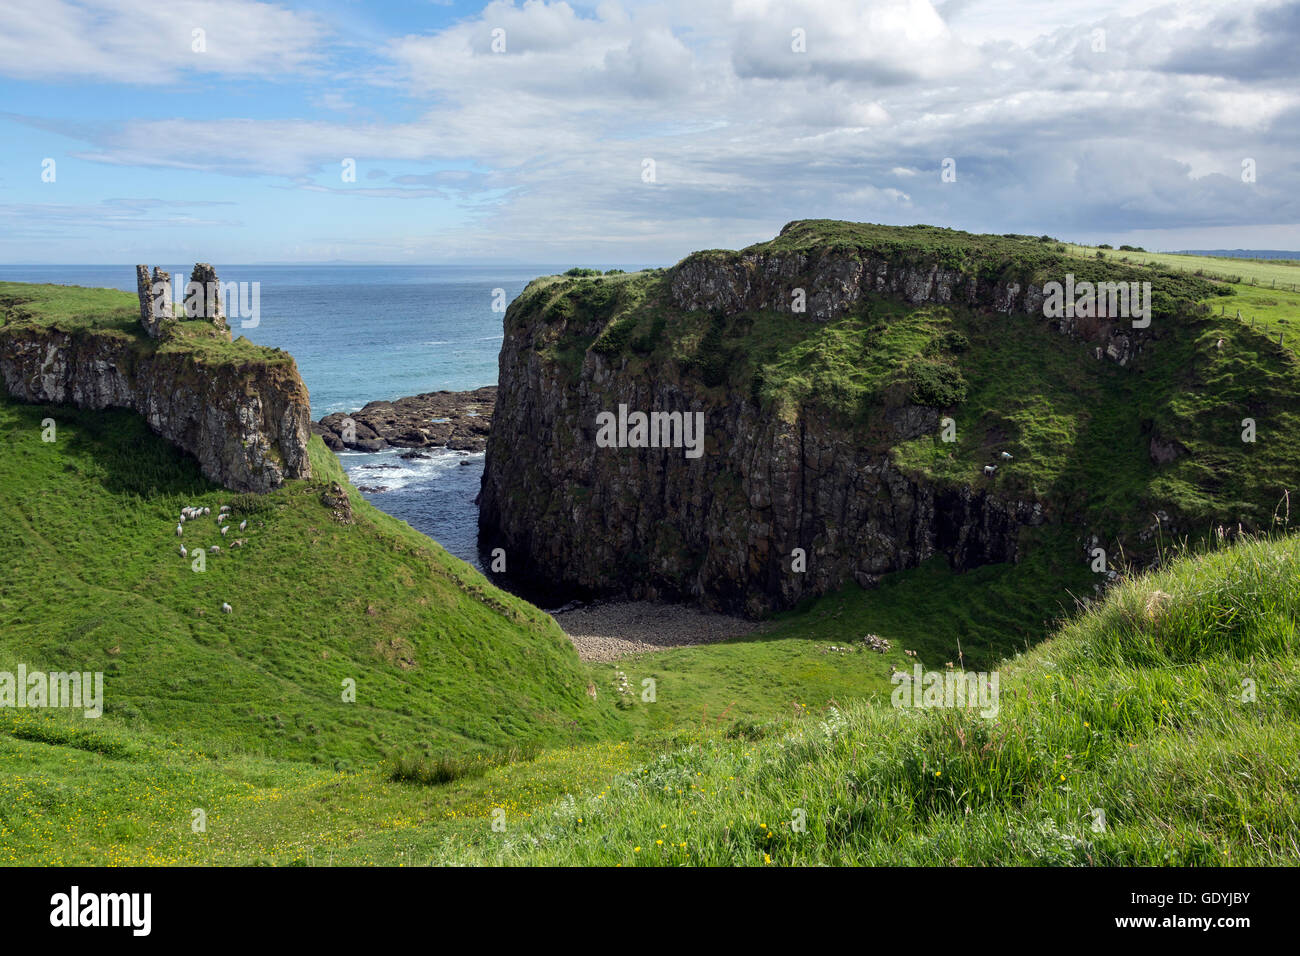 Dunseverick Castle in County Antrim, Northern Ireland. Located near the small village of Dunseverick and the Giant's Causeway. D Stock Photo